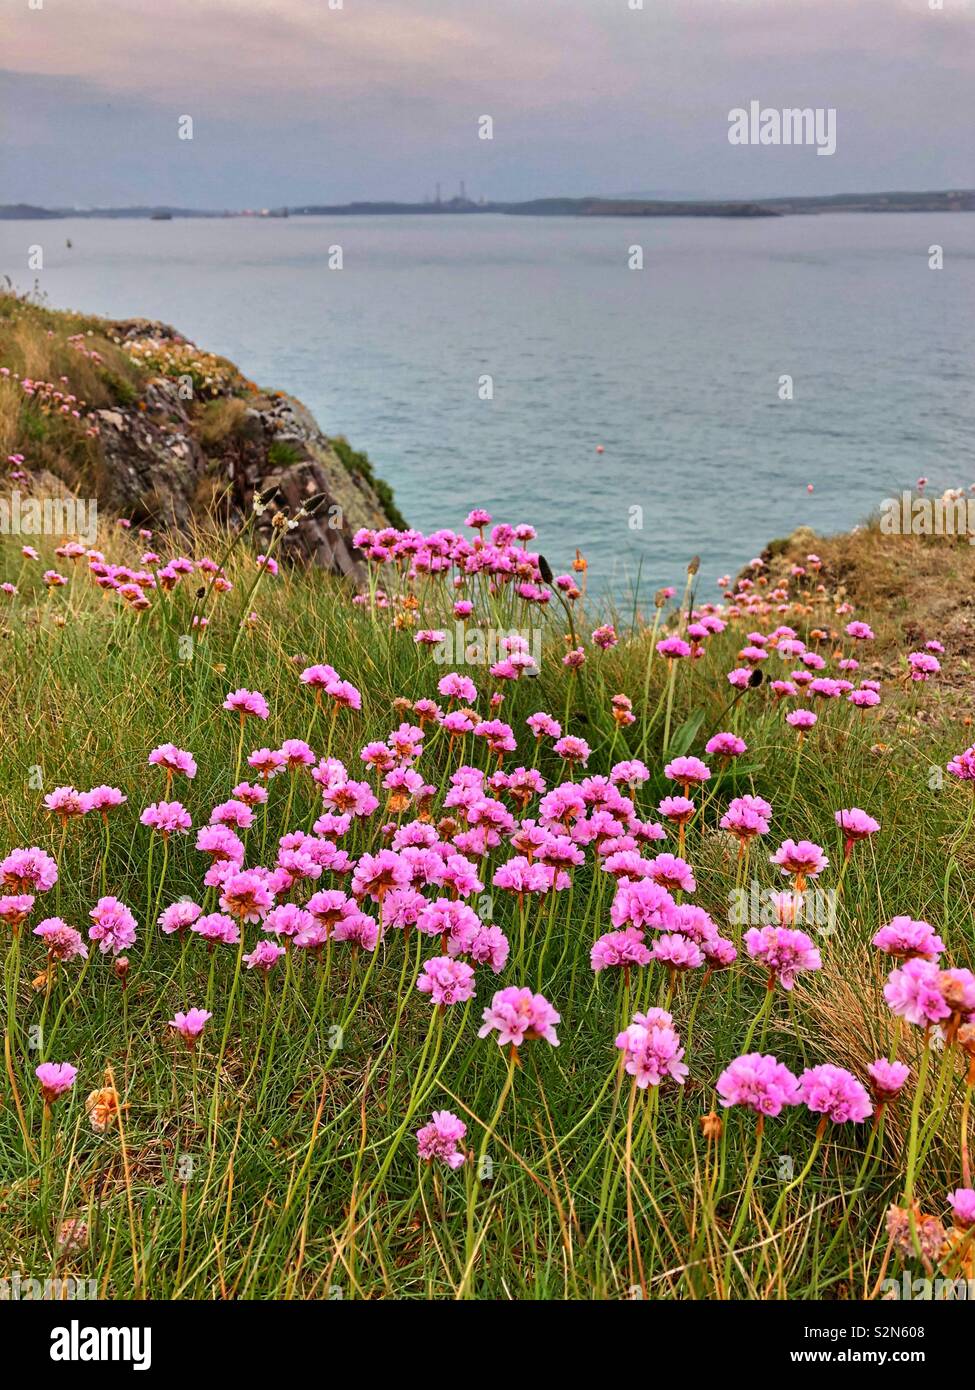 Sea pinks or Thrift (Armeria maritima) growing on cliffs at Dale, West Wales with Milford Haven oil refinery in the far distance. Stock Photo